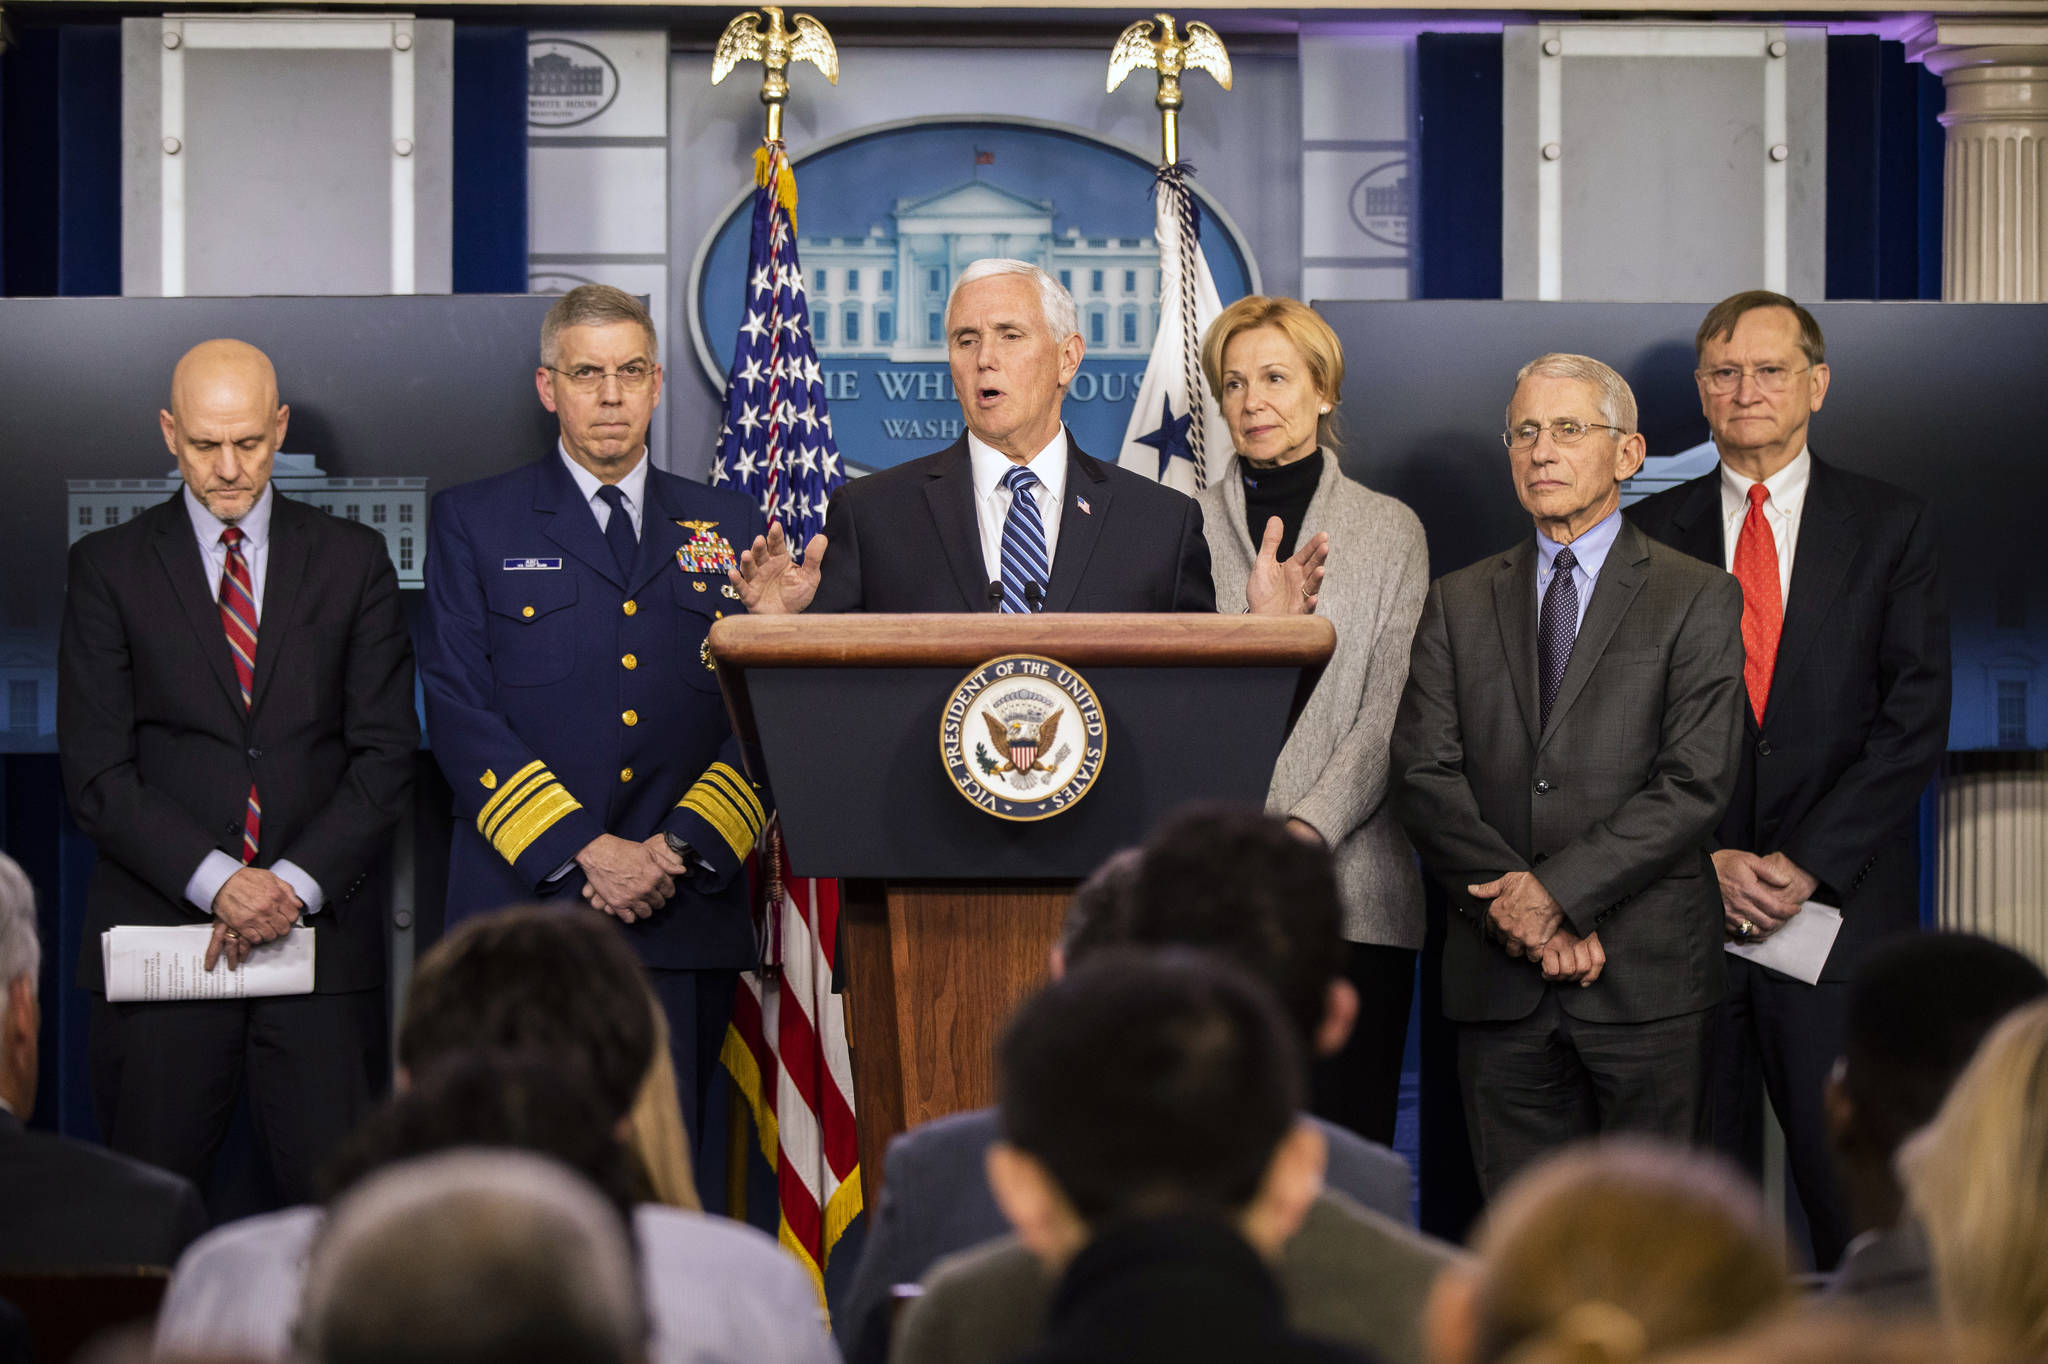 Vice President Mike Pence with, from left, U.S. Food and Drug Administration Commissioner Stephen Hahn, Coast Guard Vice Adm. Daniel Abel, White House coronavirus response coordinator Dr. Deborah Birx, Director of the National Institute of Allergy and Infectious Diseases at the National Institutes of Health Anthony Fauci and Assistant Secretary for Preparedness and Response at the Department of Health & Human Services Robert Kadlec, speaks to reporters during a coronavirus briefing in the Brady press briefing room of the White House, Friday, March 6, 2020, in Washington. (AP Photo/Manuel Balce Ceneta)